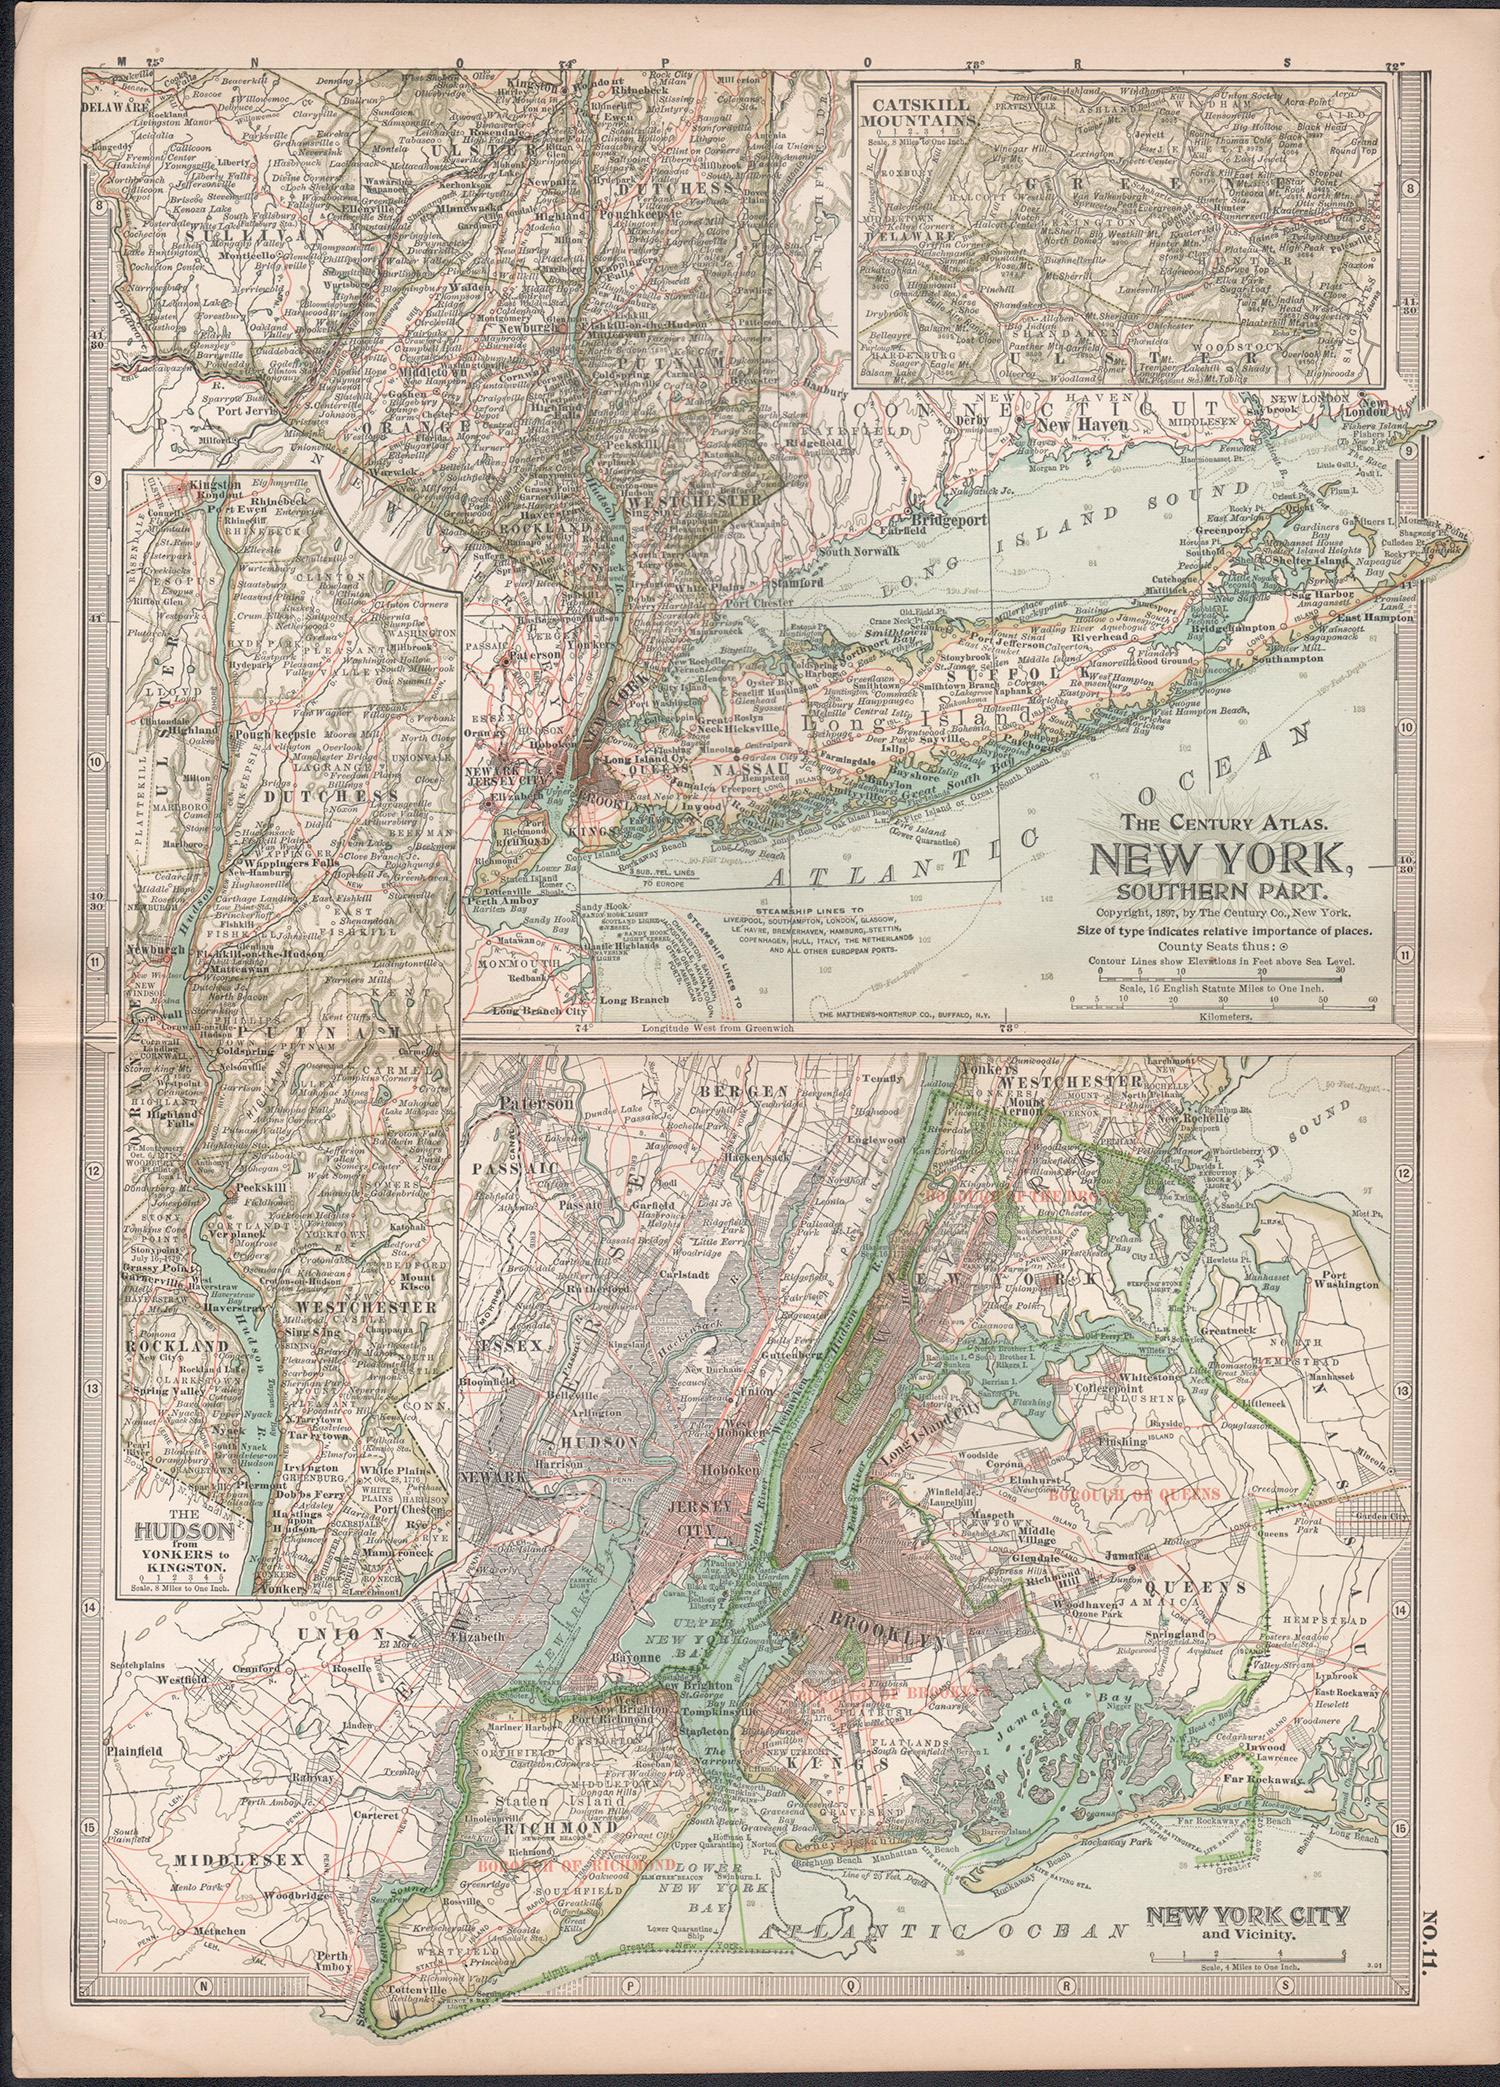 New York. Southern Part. USA. Century Atlas state antique vintage map - Print by Unknown